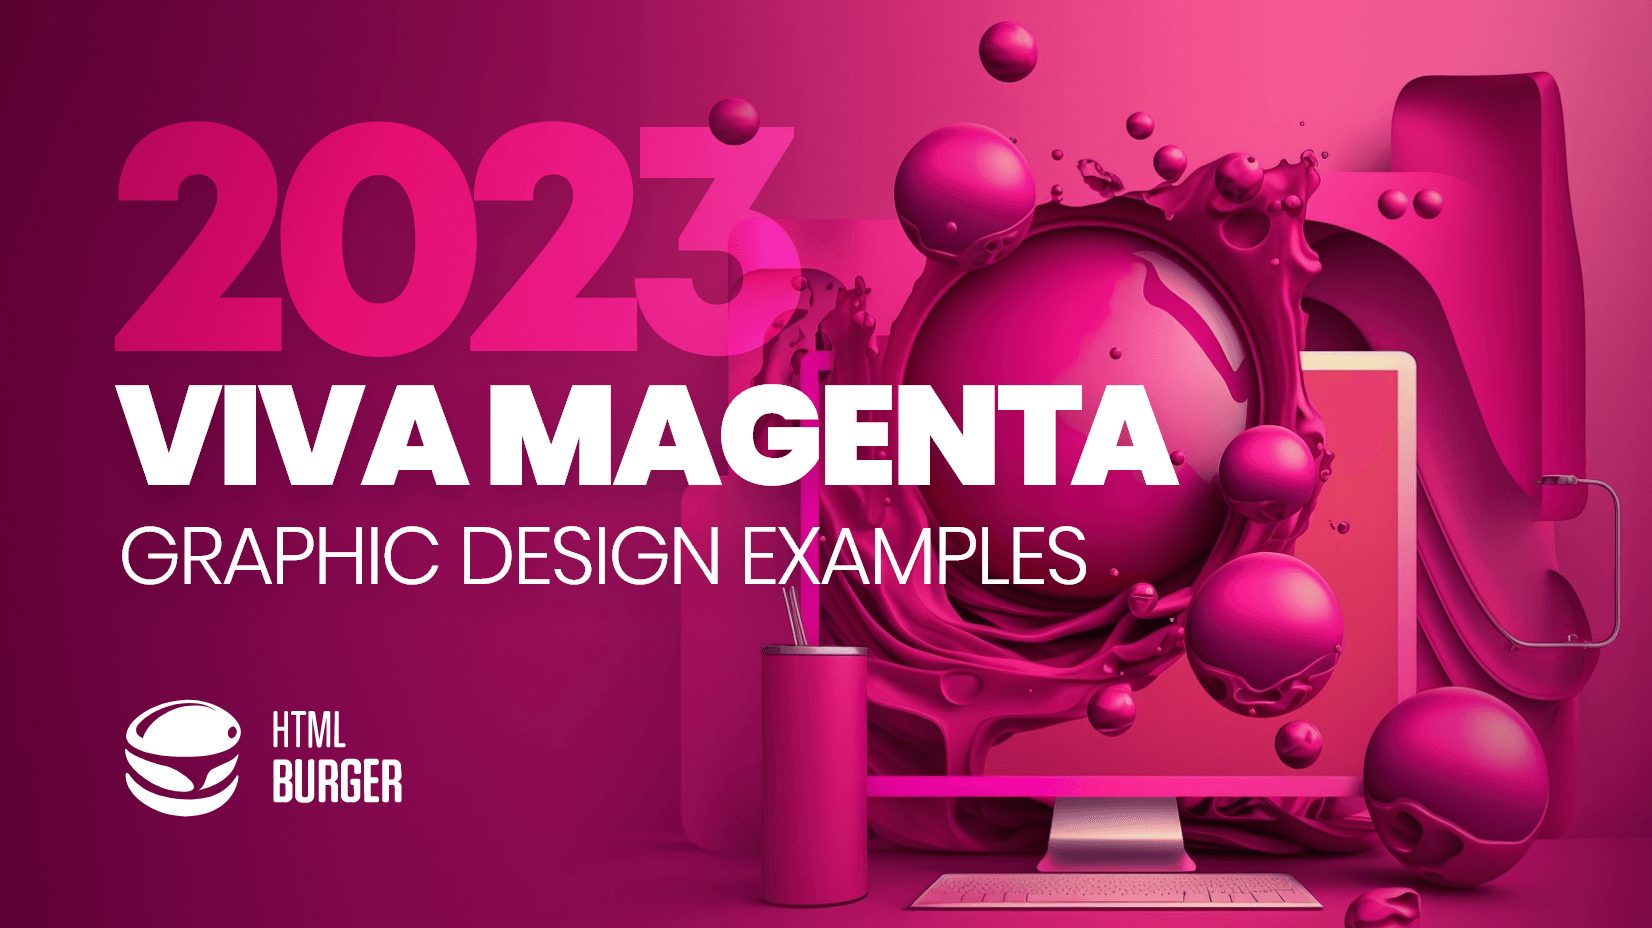 Color of the Year 2023: Viva Magenta Graphic Design Examples